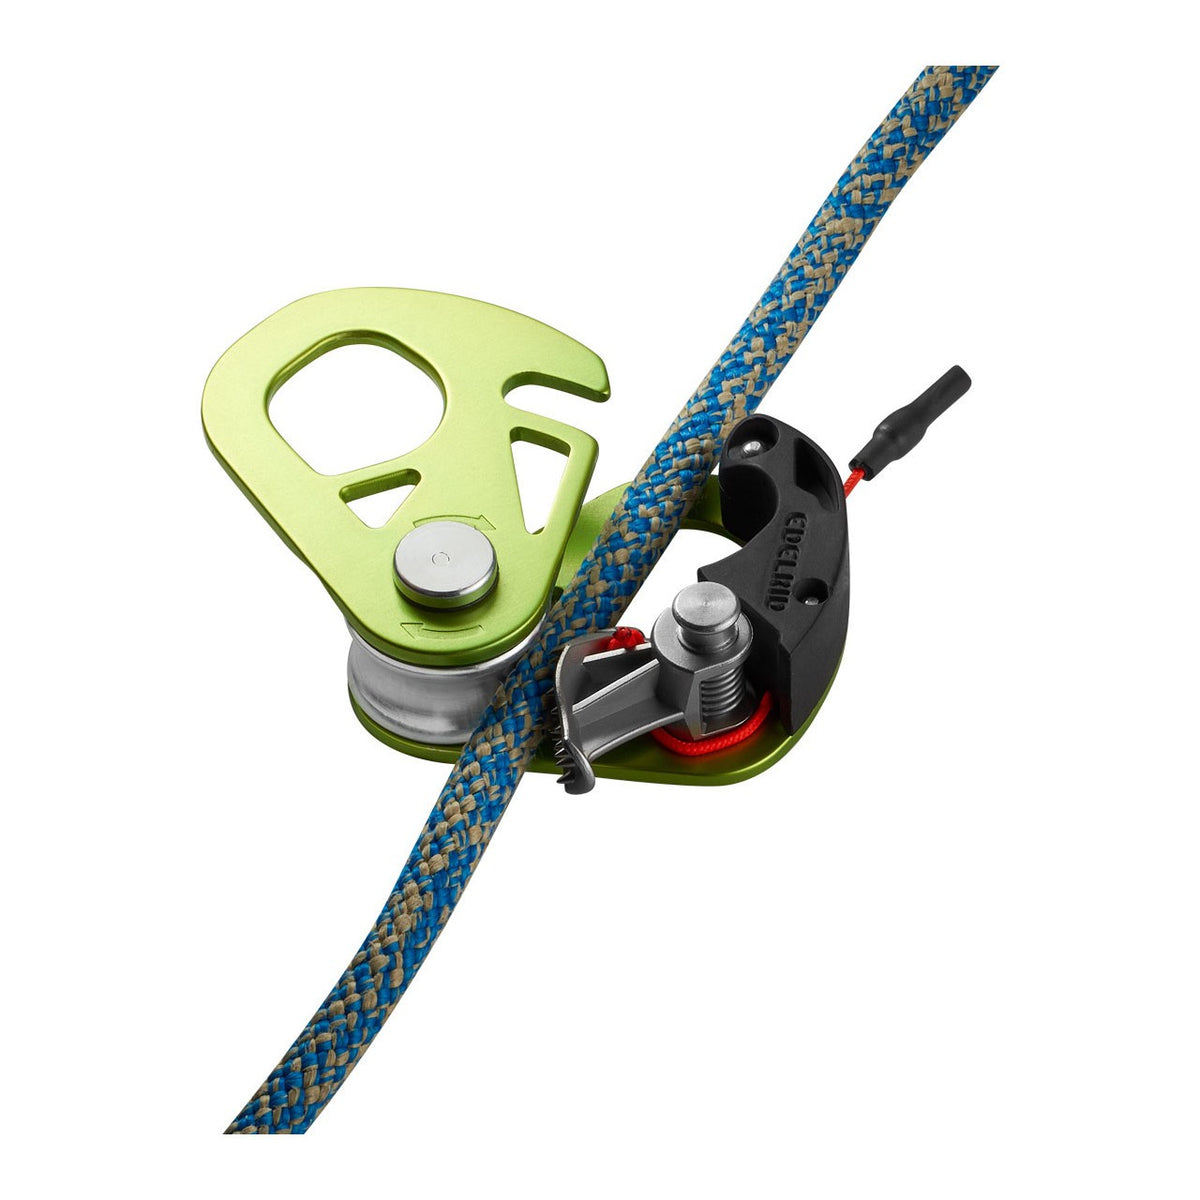 Edelrid Spoc shown with rope being inserted